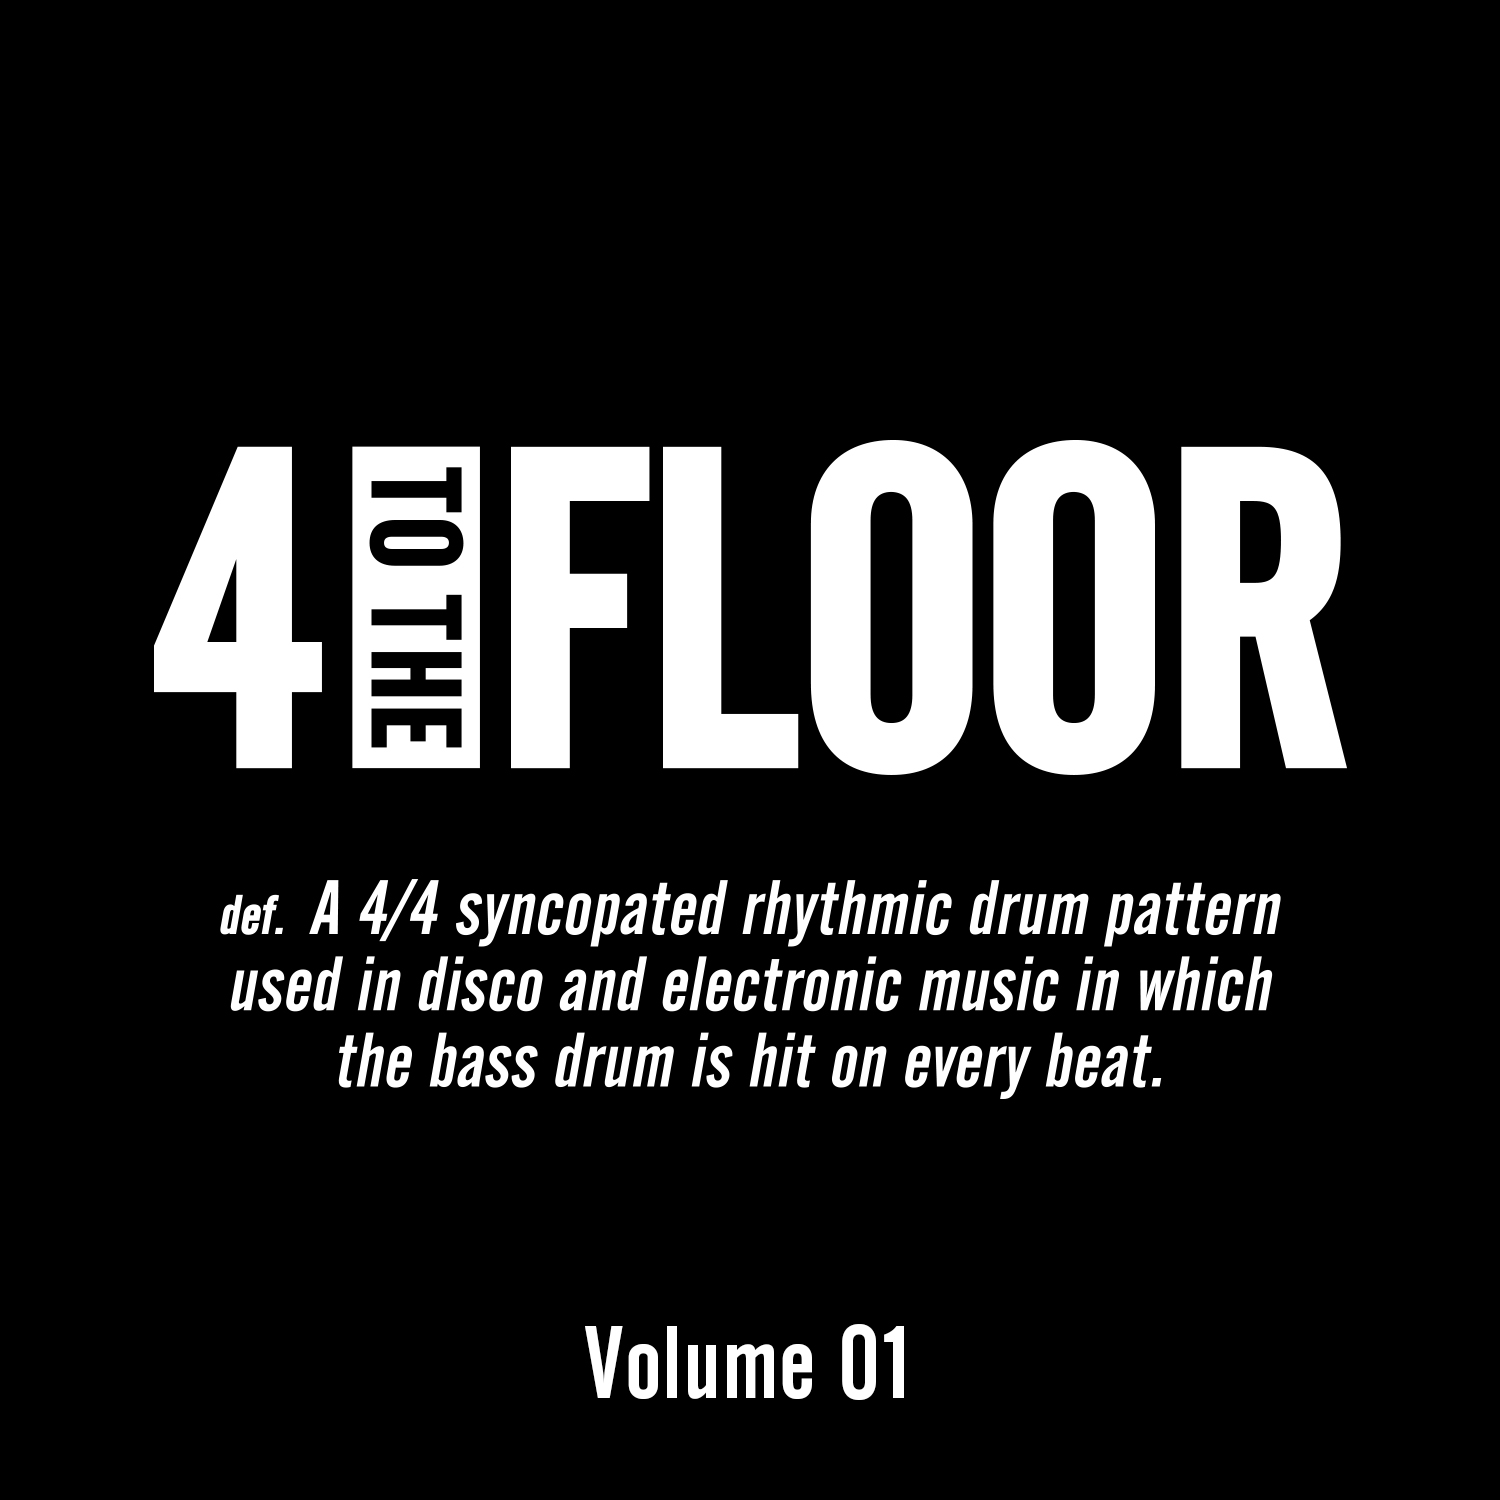 Go to 4 floor. 4 To the Floor. Four to the Floor. Four on the Floor Beat. Defected records.